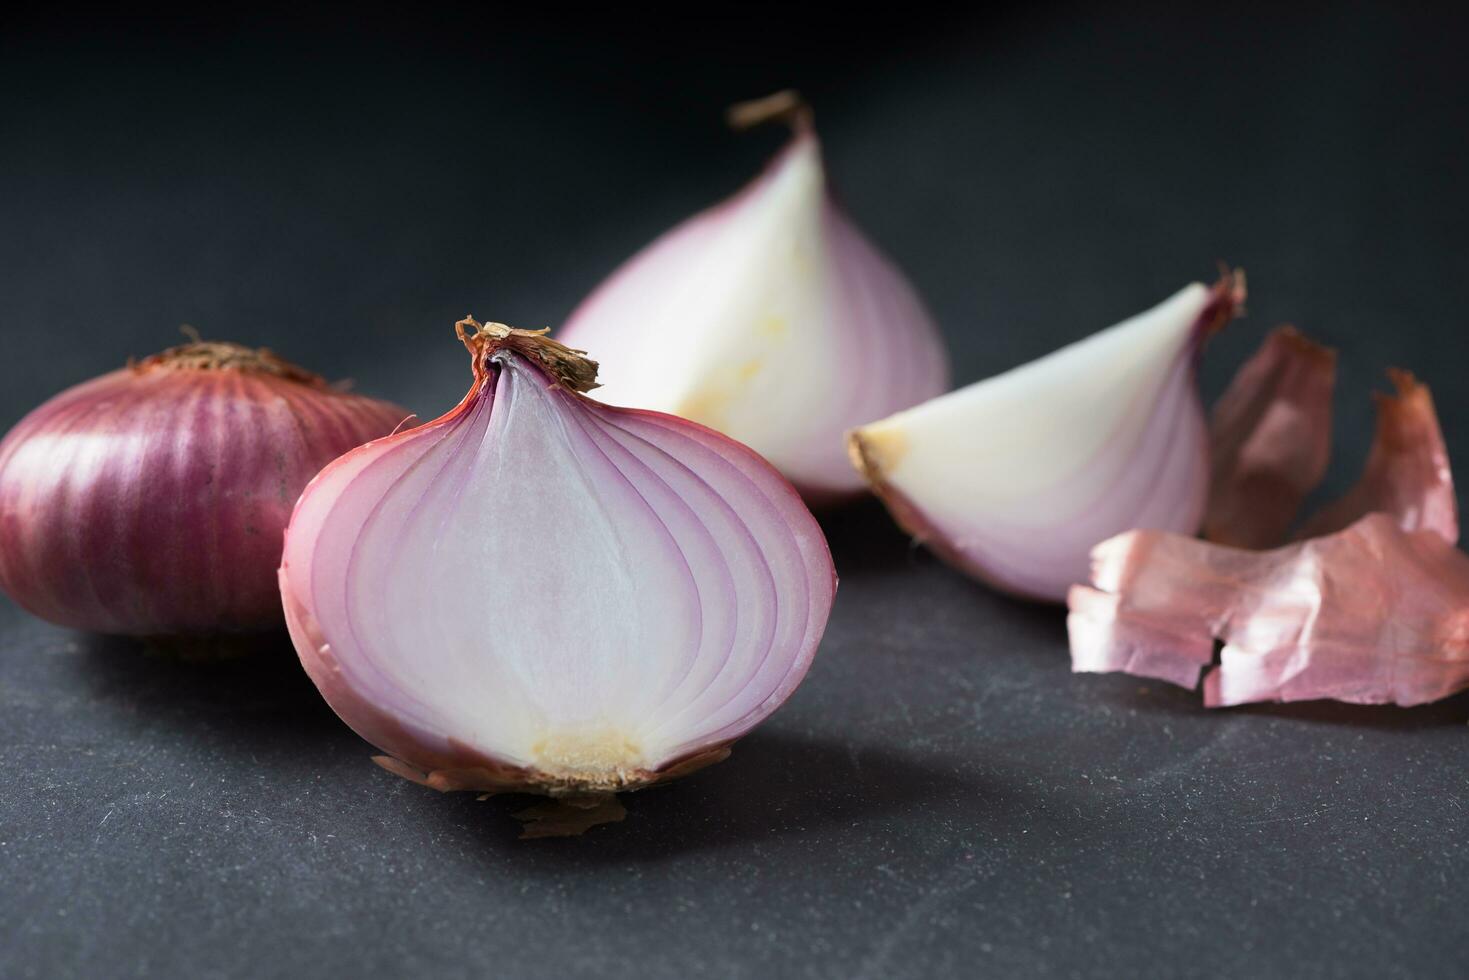 sliced red onions on black stone background photo